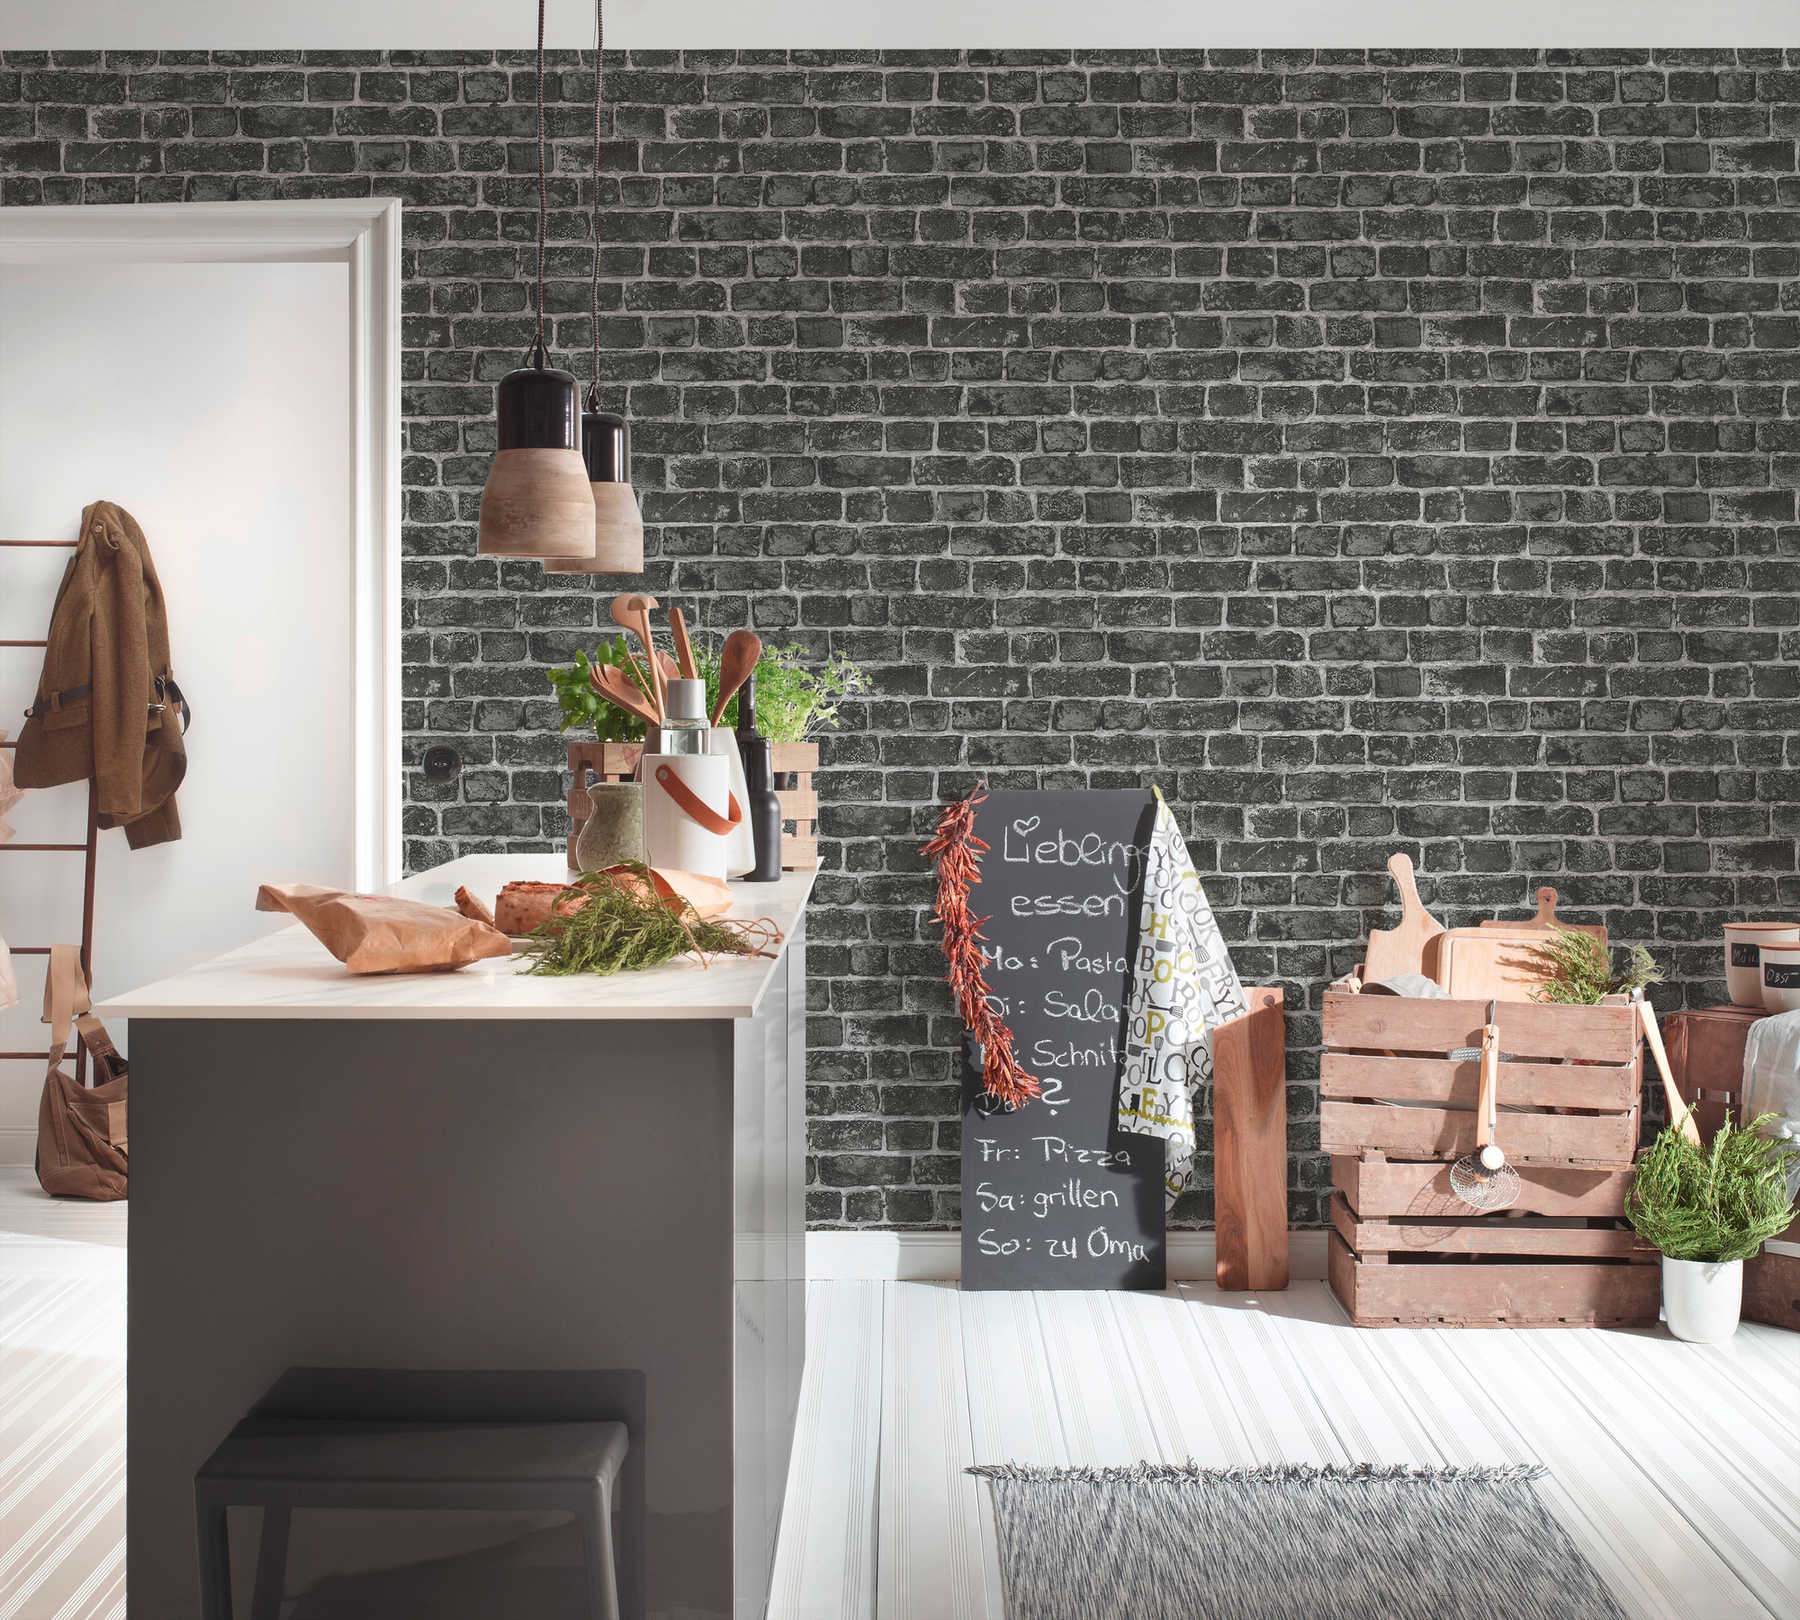             Nature stone wall wallpaper with dark grey bricks and light joints - black, grey
        